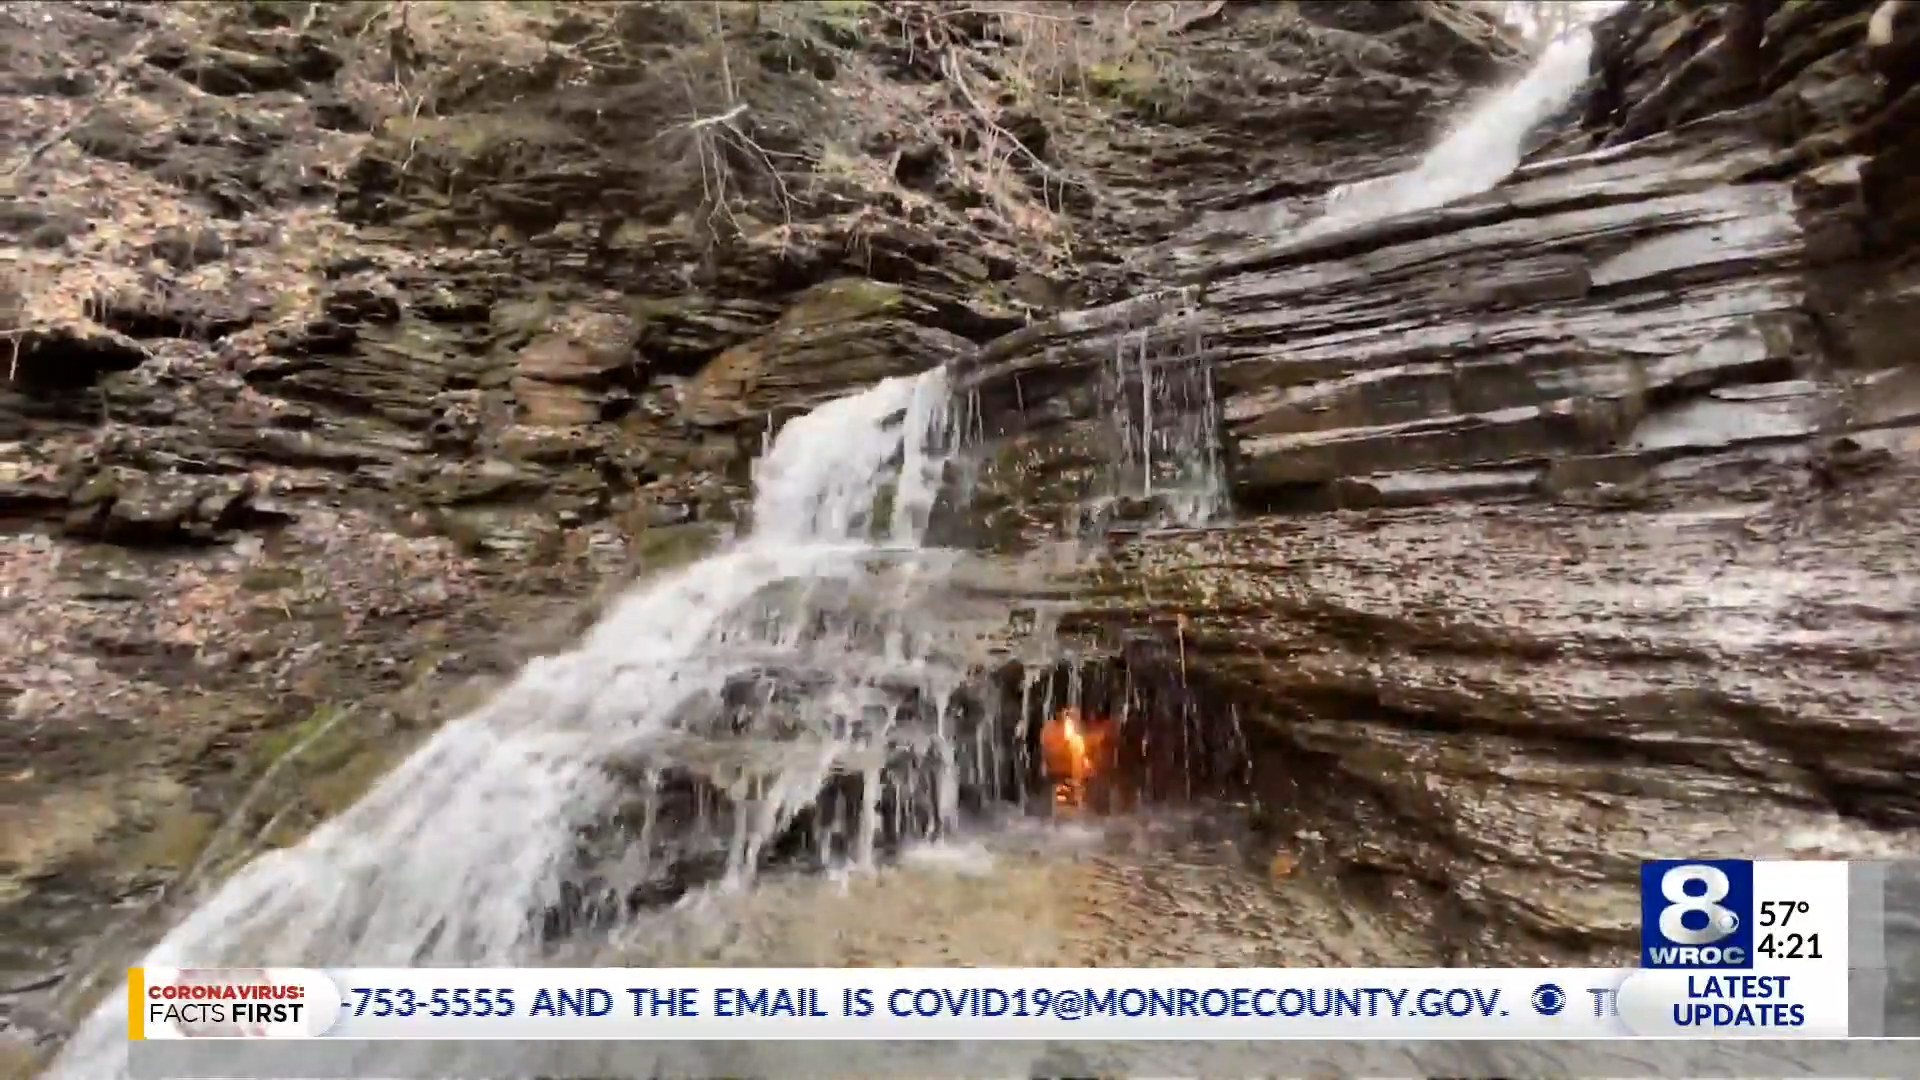 news story about the waterfall